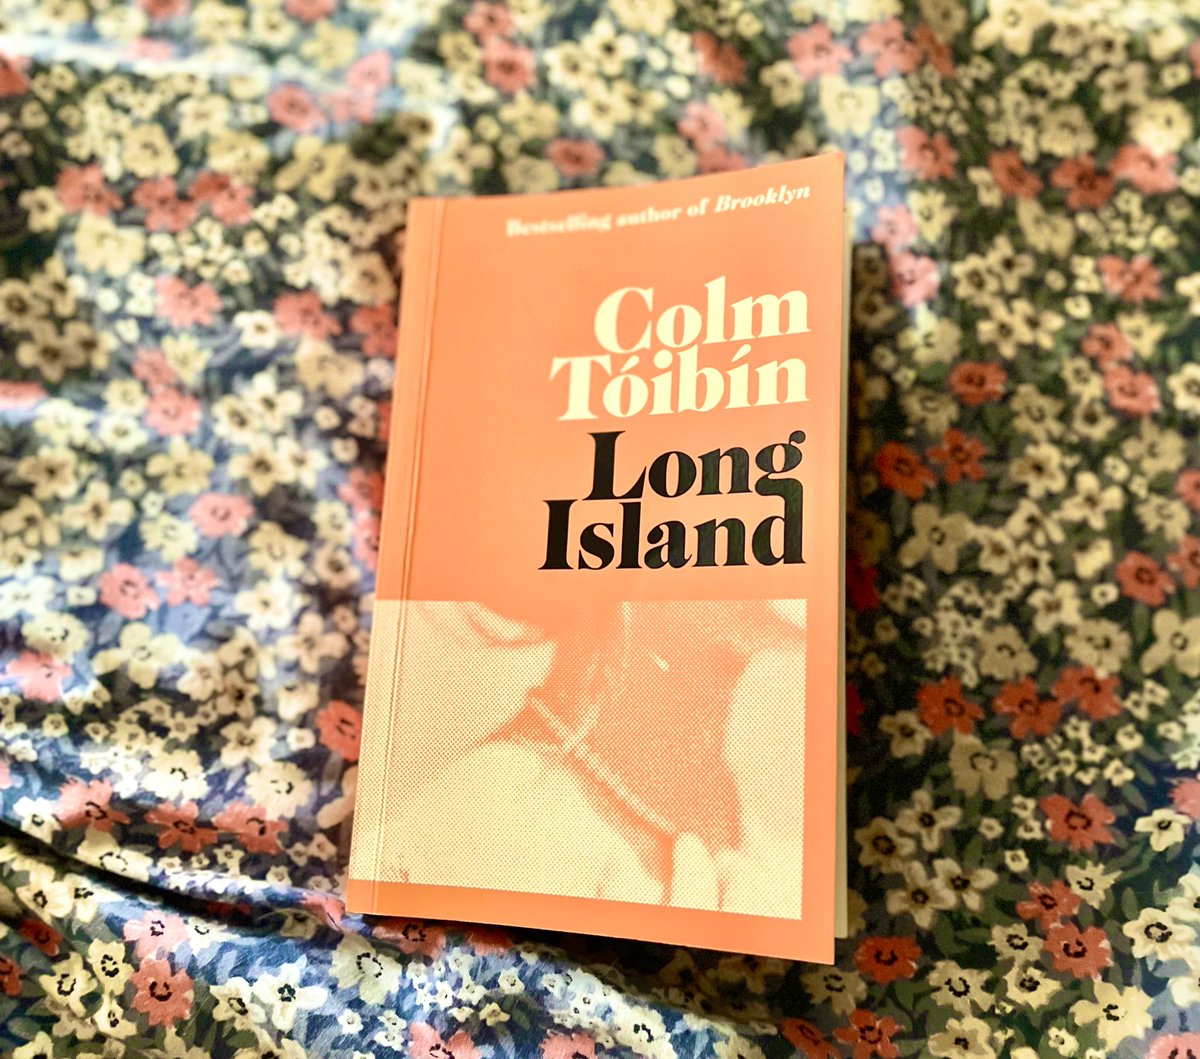 If like me you loved #Brooklyn - I think #LongIsland by #ColmTóibín is even better. A beautifully written and unforgettable novel about love, hope and missed chances. I can’t recommend it enough. It’s out from @picadorbooks on May 23rd. Thank you to @bookbreakuk for my copy.